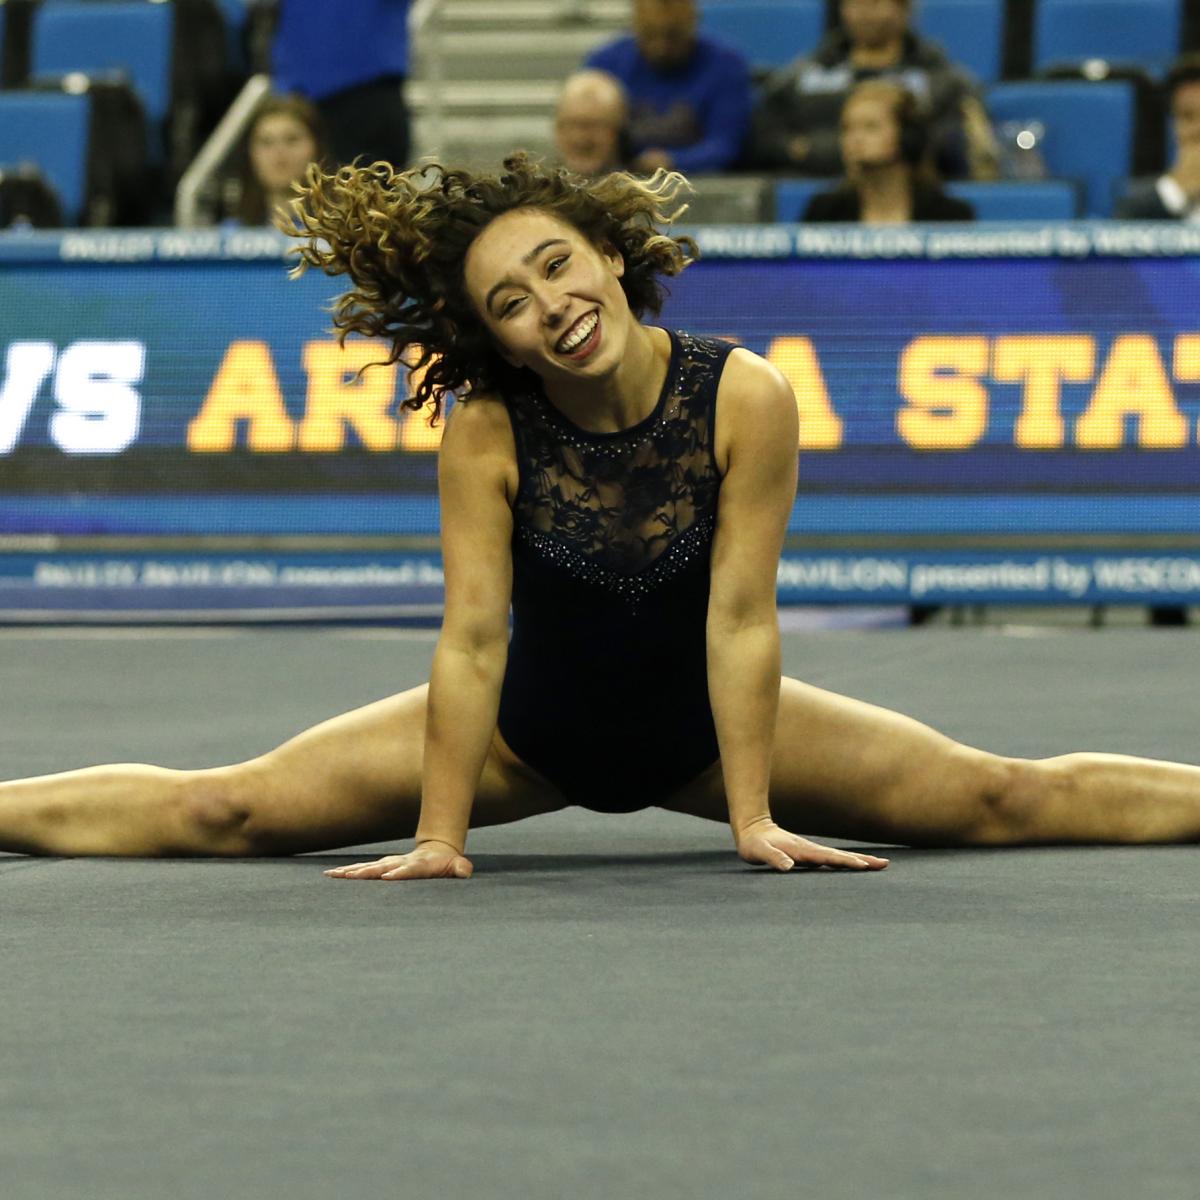 Katelyn Ohashi Scores Perfect 10 In Floor Routine For Second Time